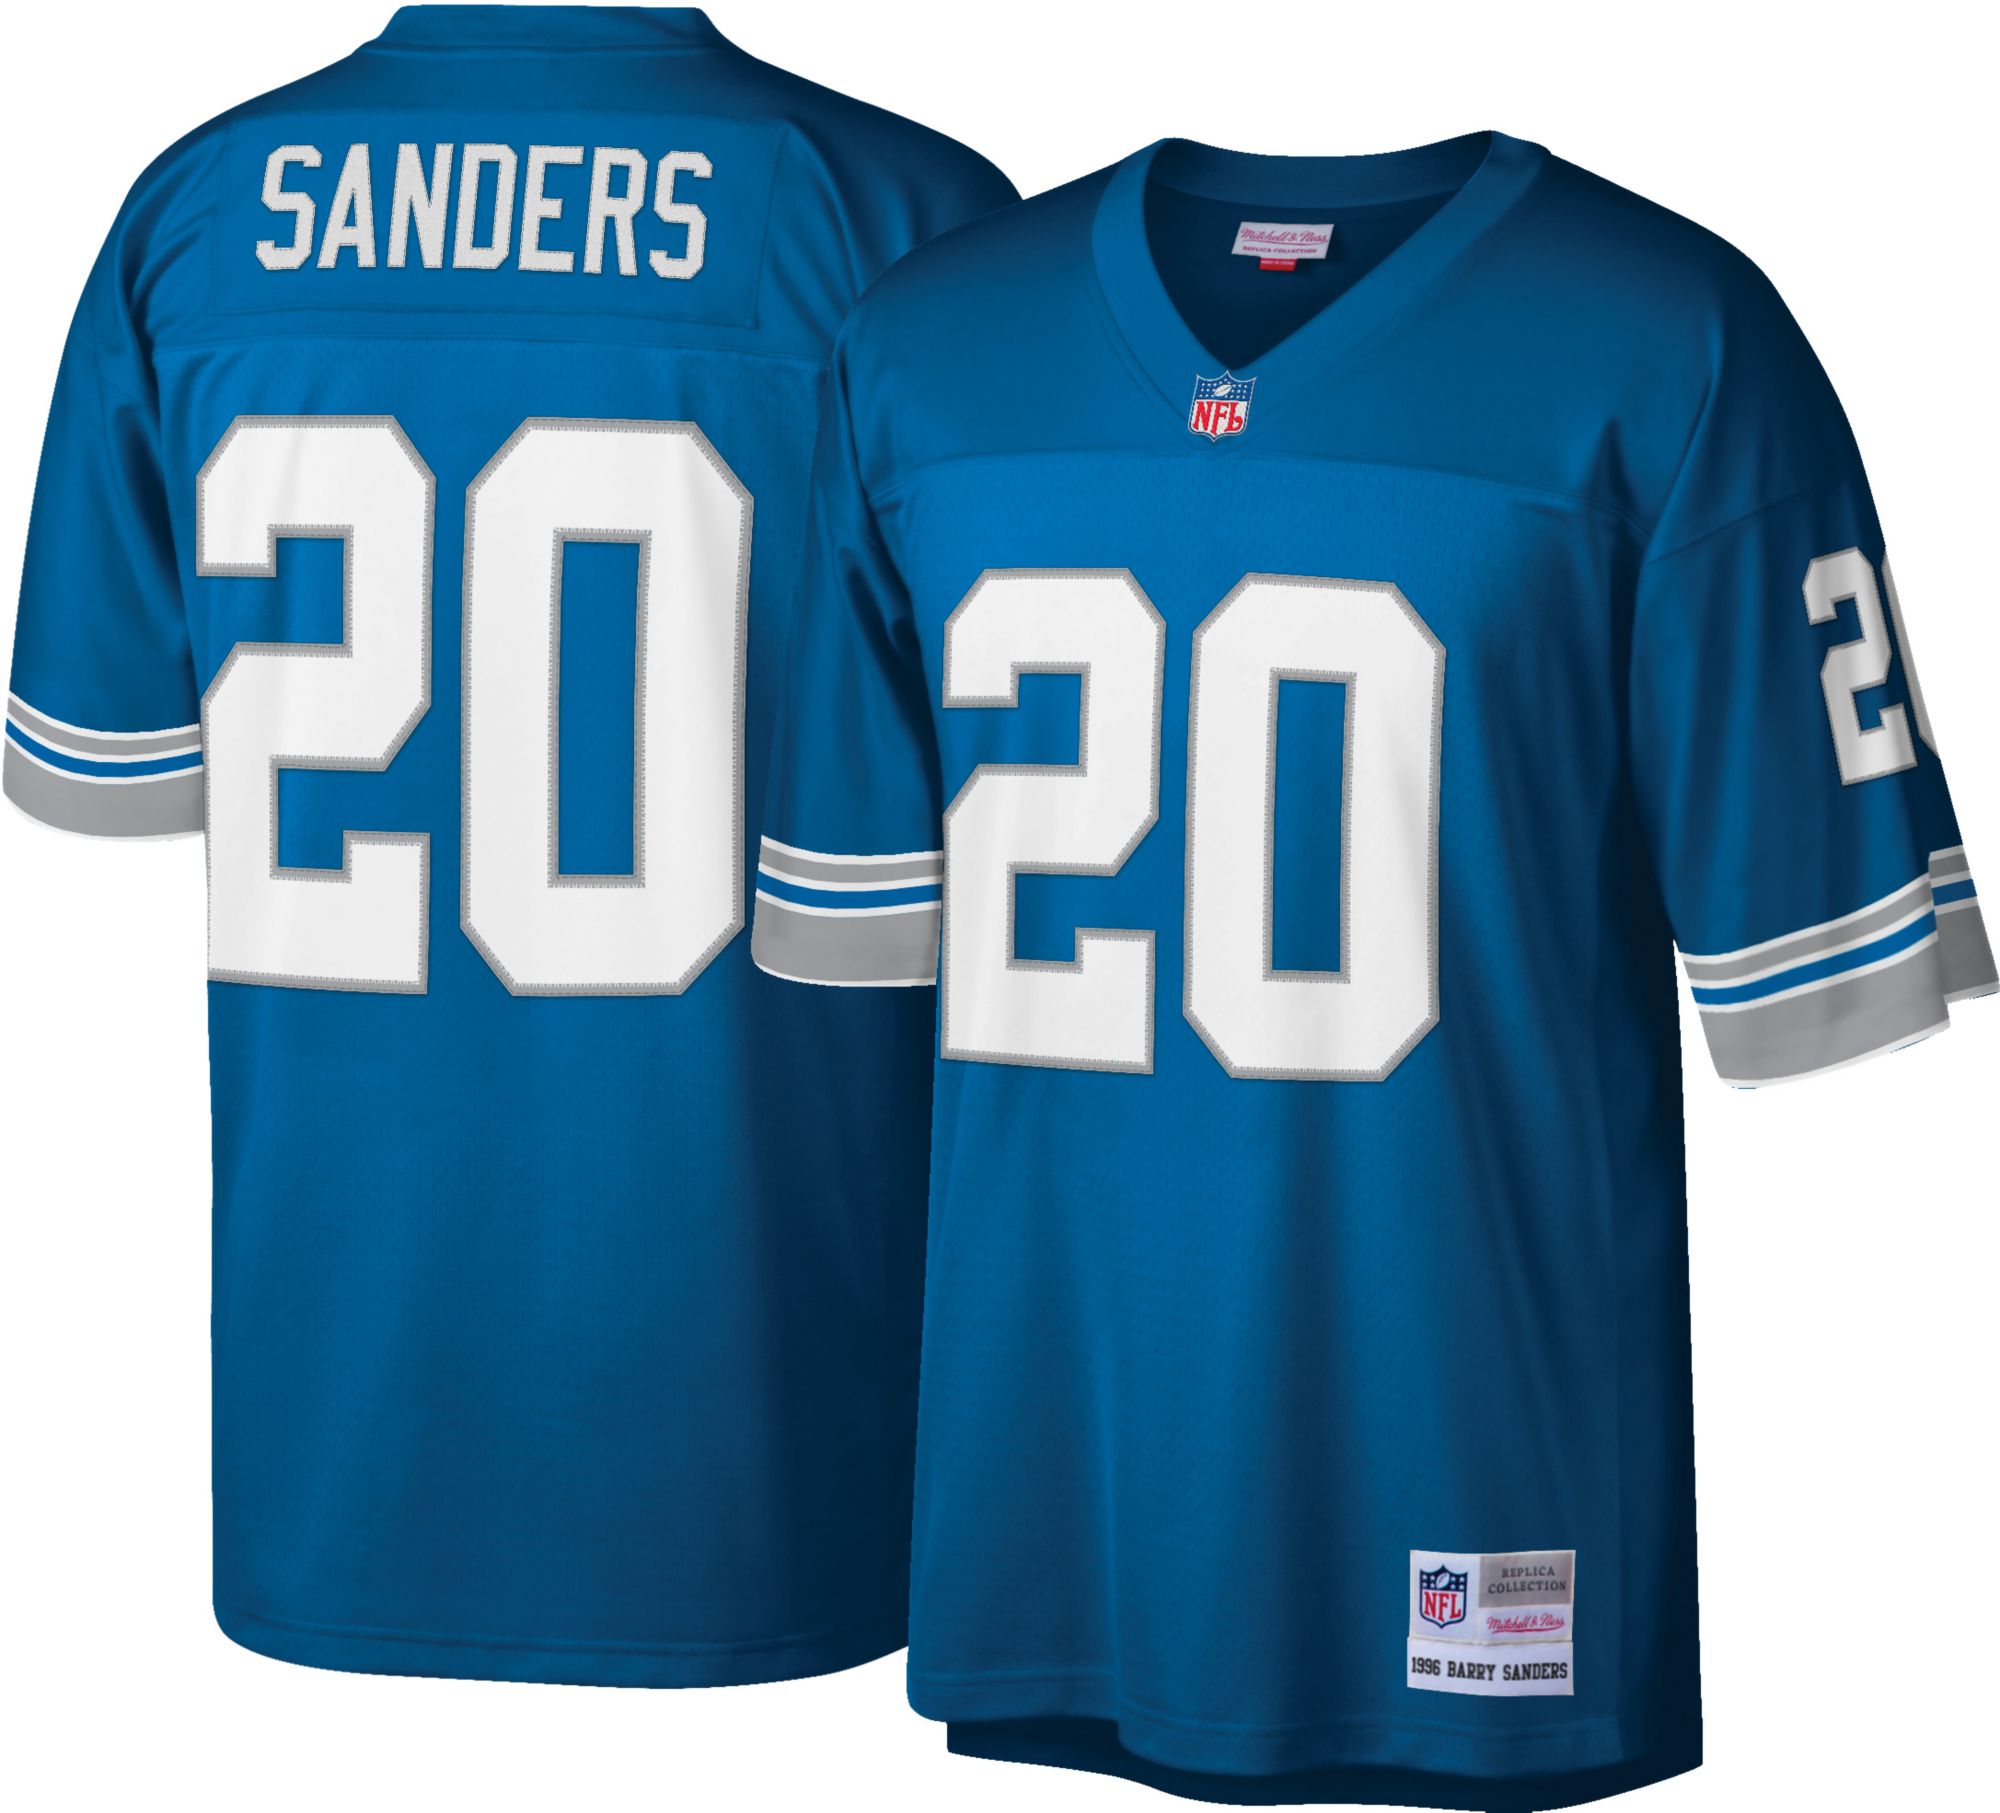 barry sanders salute to service jersey